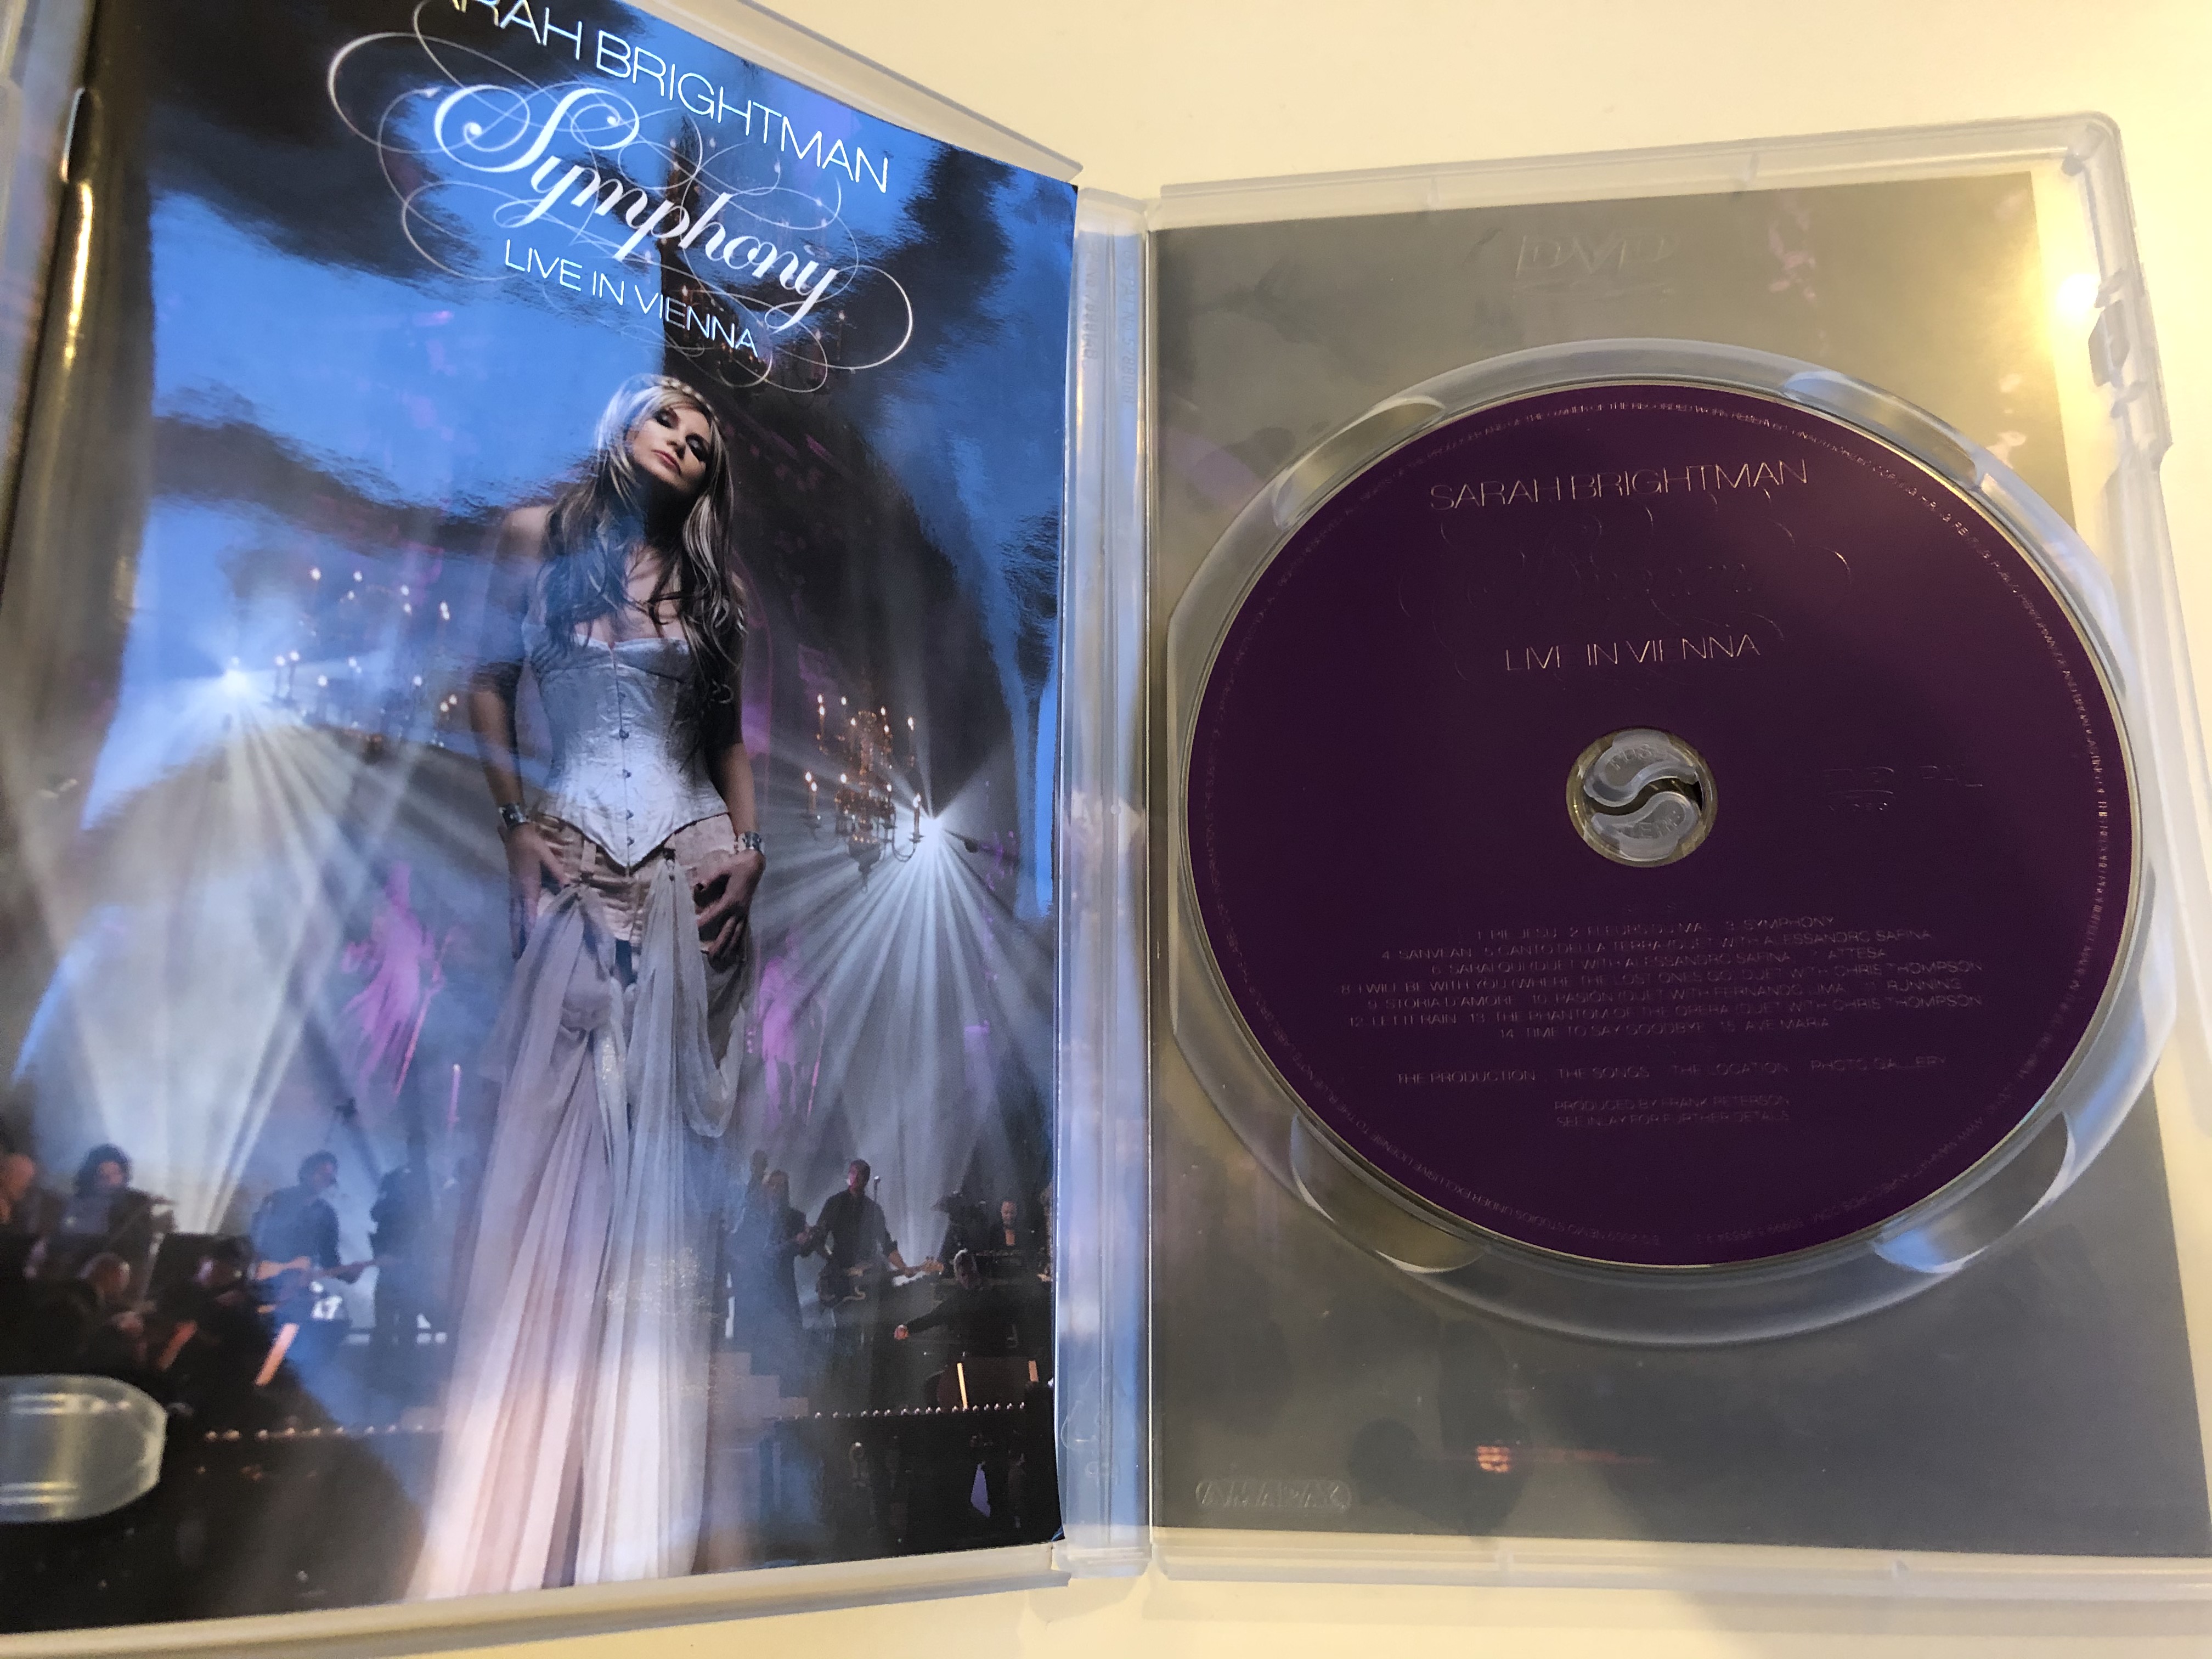 sarah-brightman-symphony-dvd-2009-live-in-vienna-produced-by-frank-peterson-2.jpg